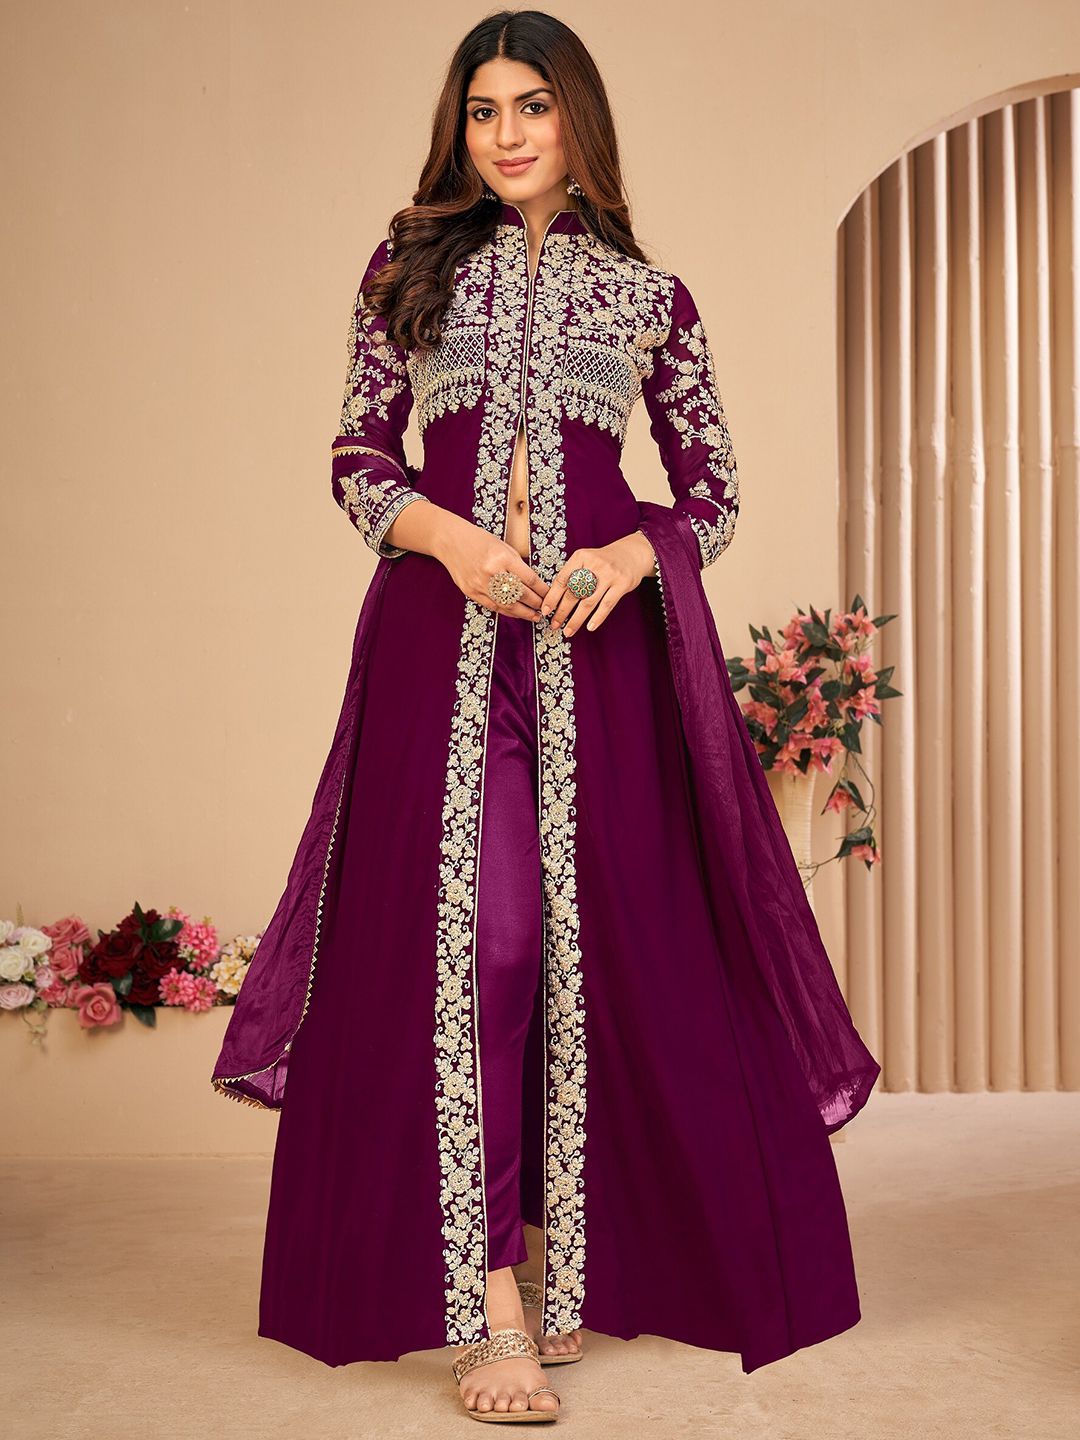 Divine International Trading Co Purple Embroidered Front Slit Unstitched Dress Material Price in India